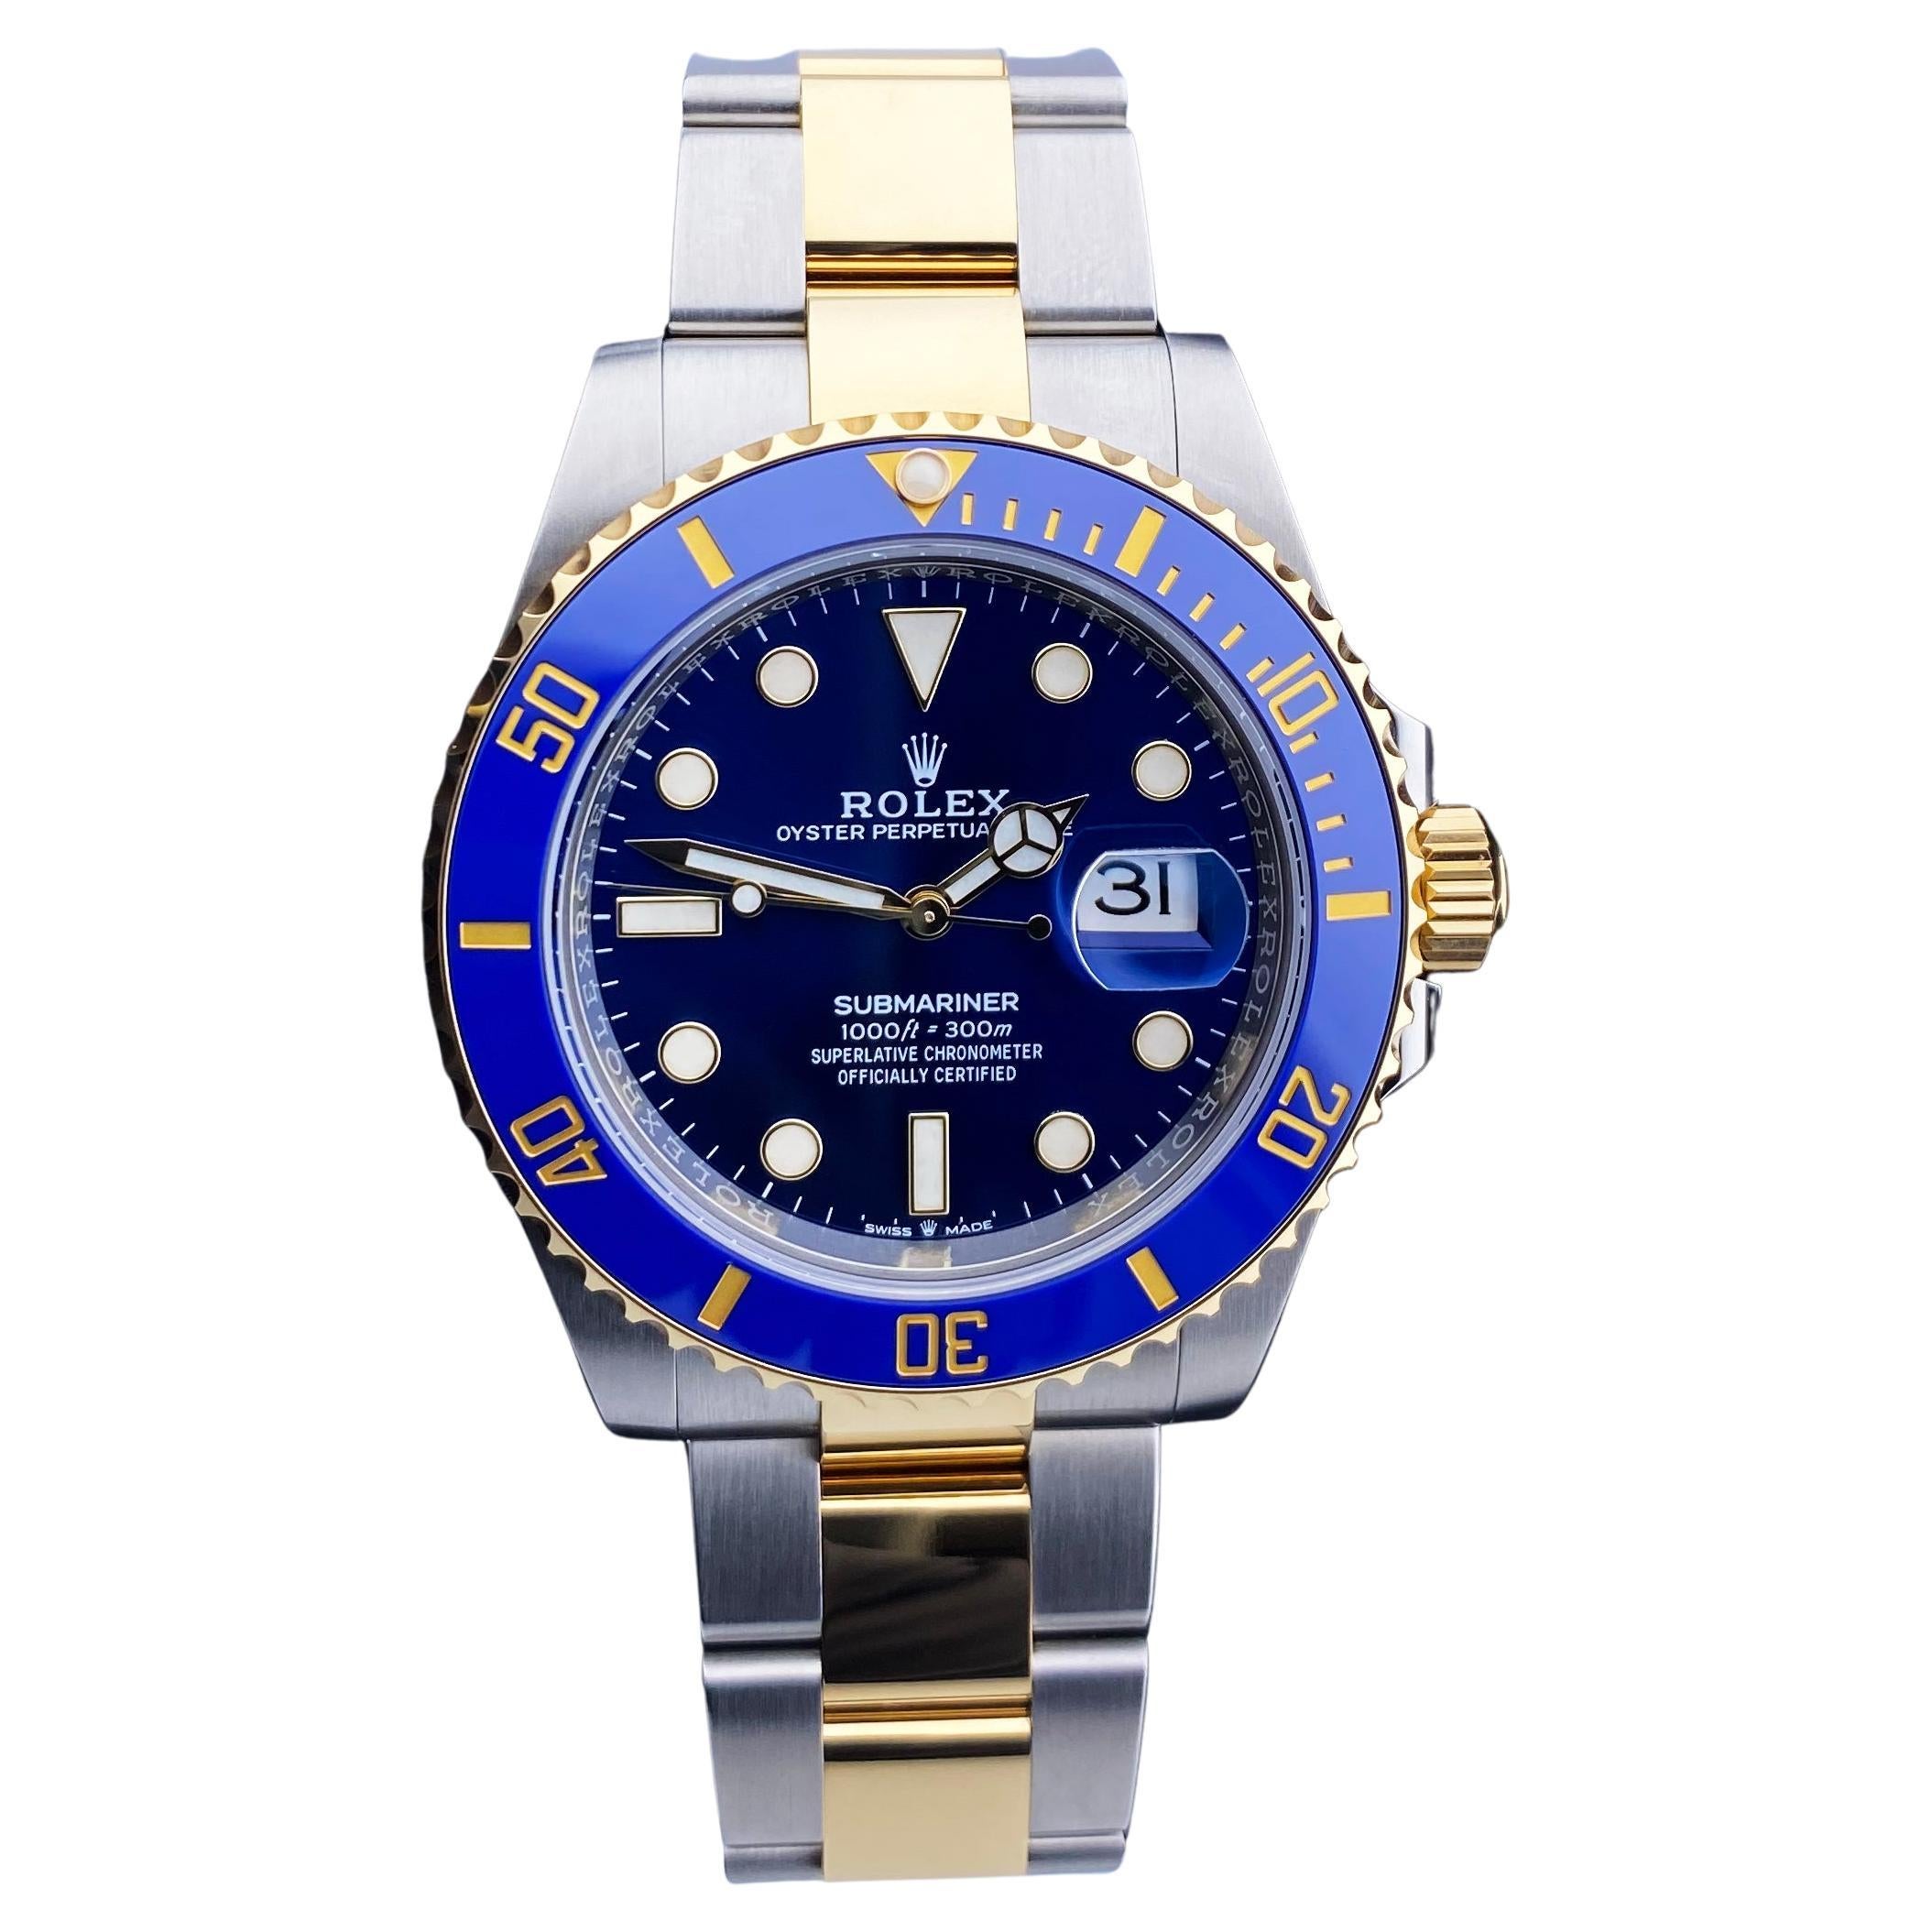 Rolex Submariner 126613LB Blue Dial Mens Watch Box & Papers